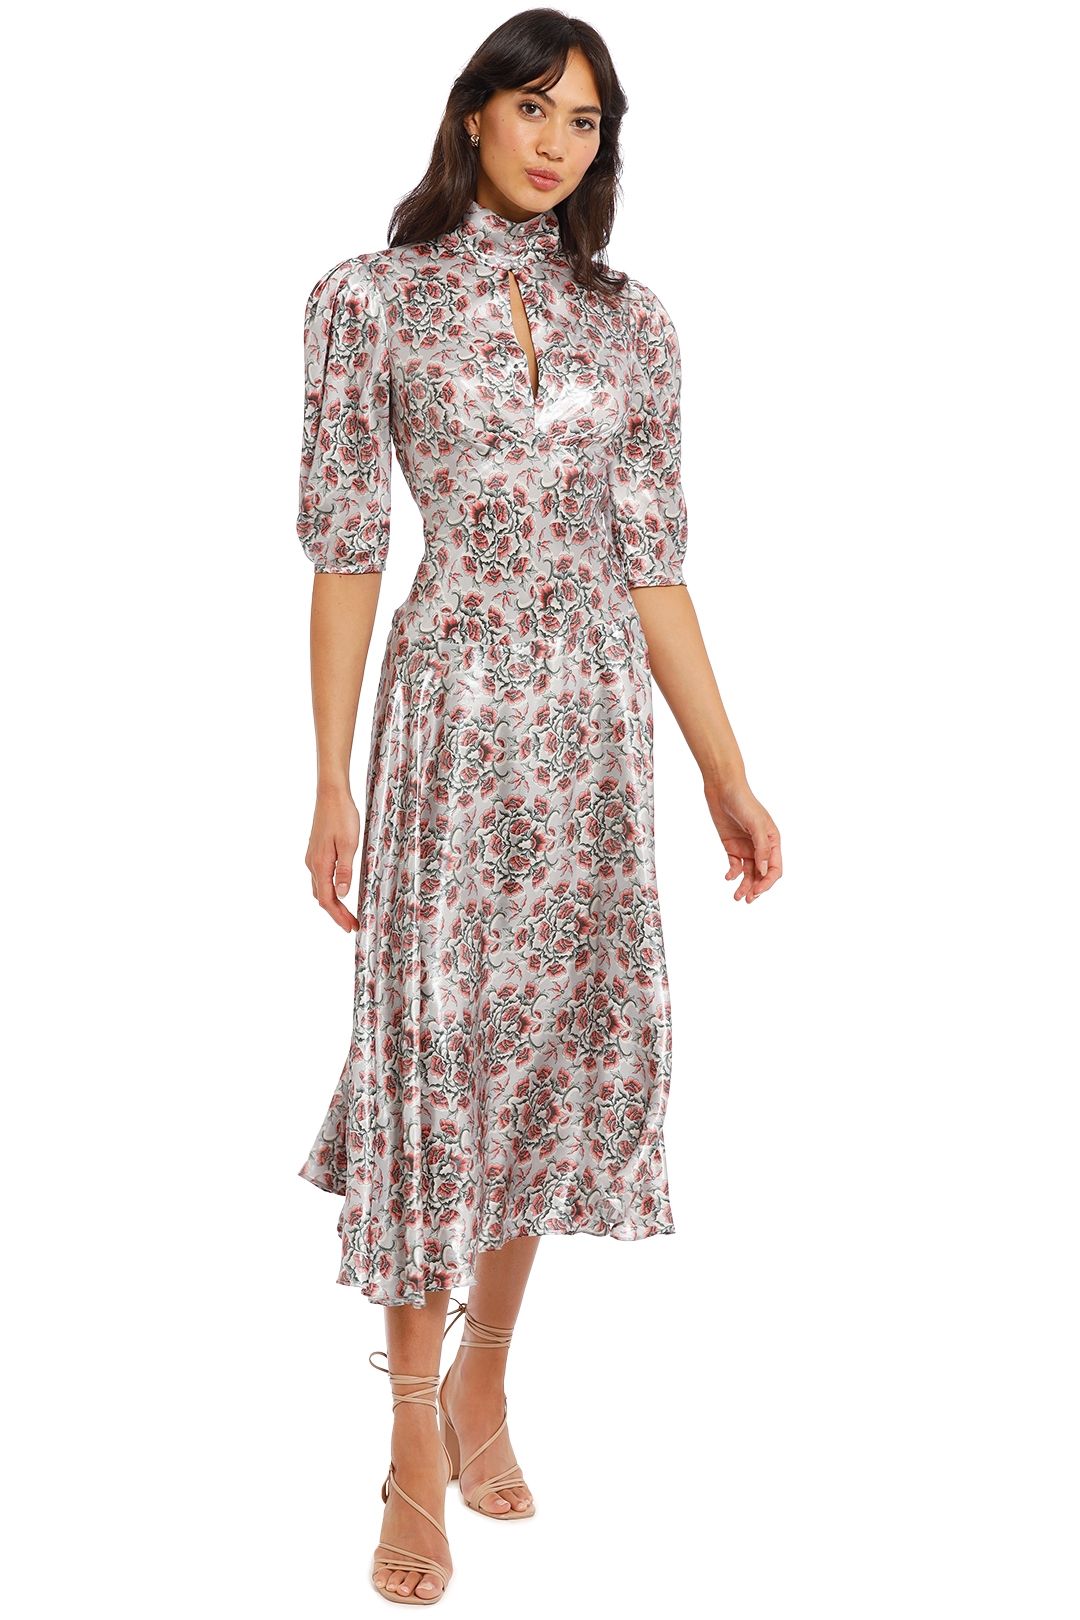 Moss and Spy Ava Dress Floral High Neck